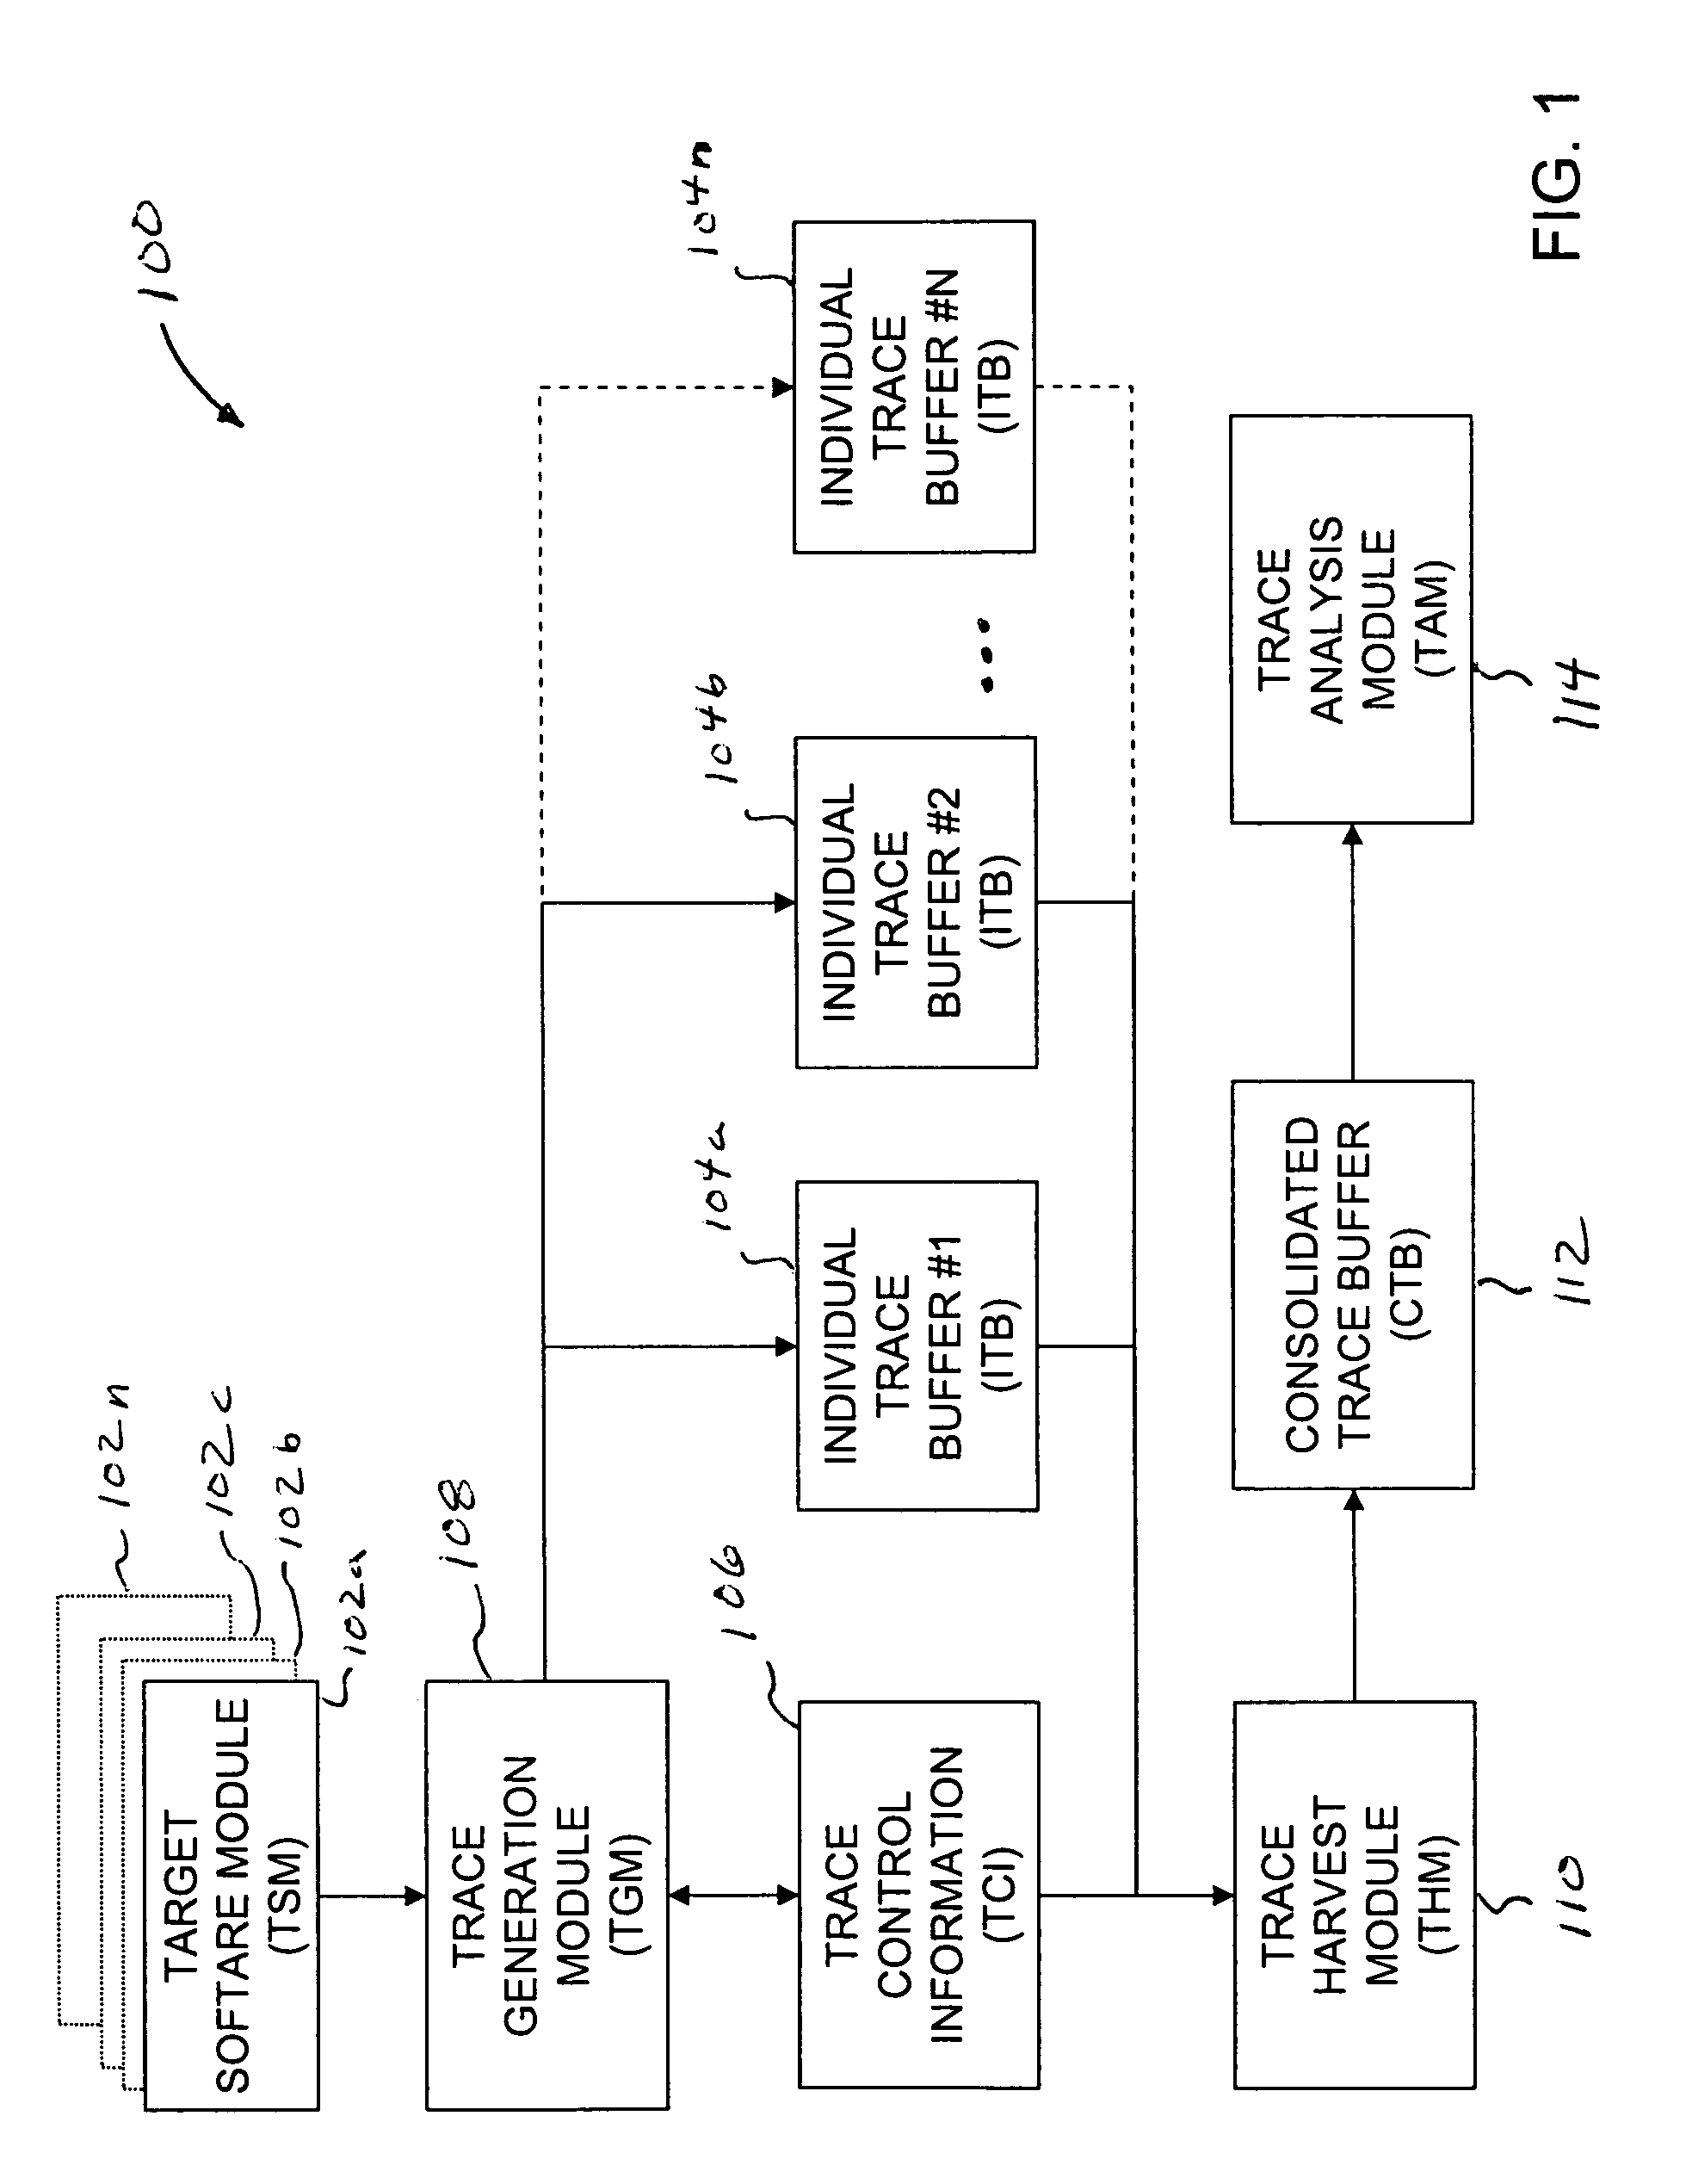 Methods and apparatus to diagnose software